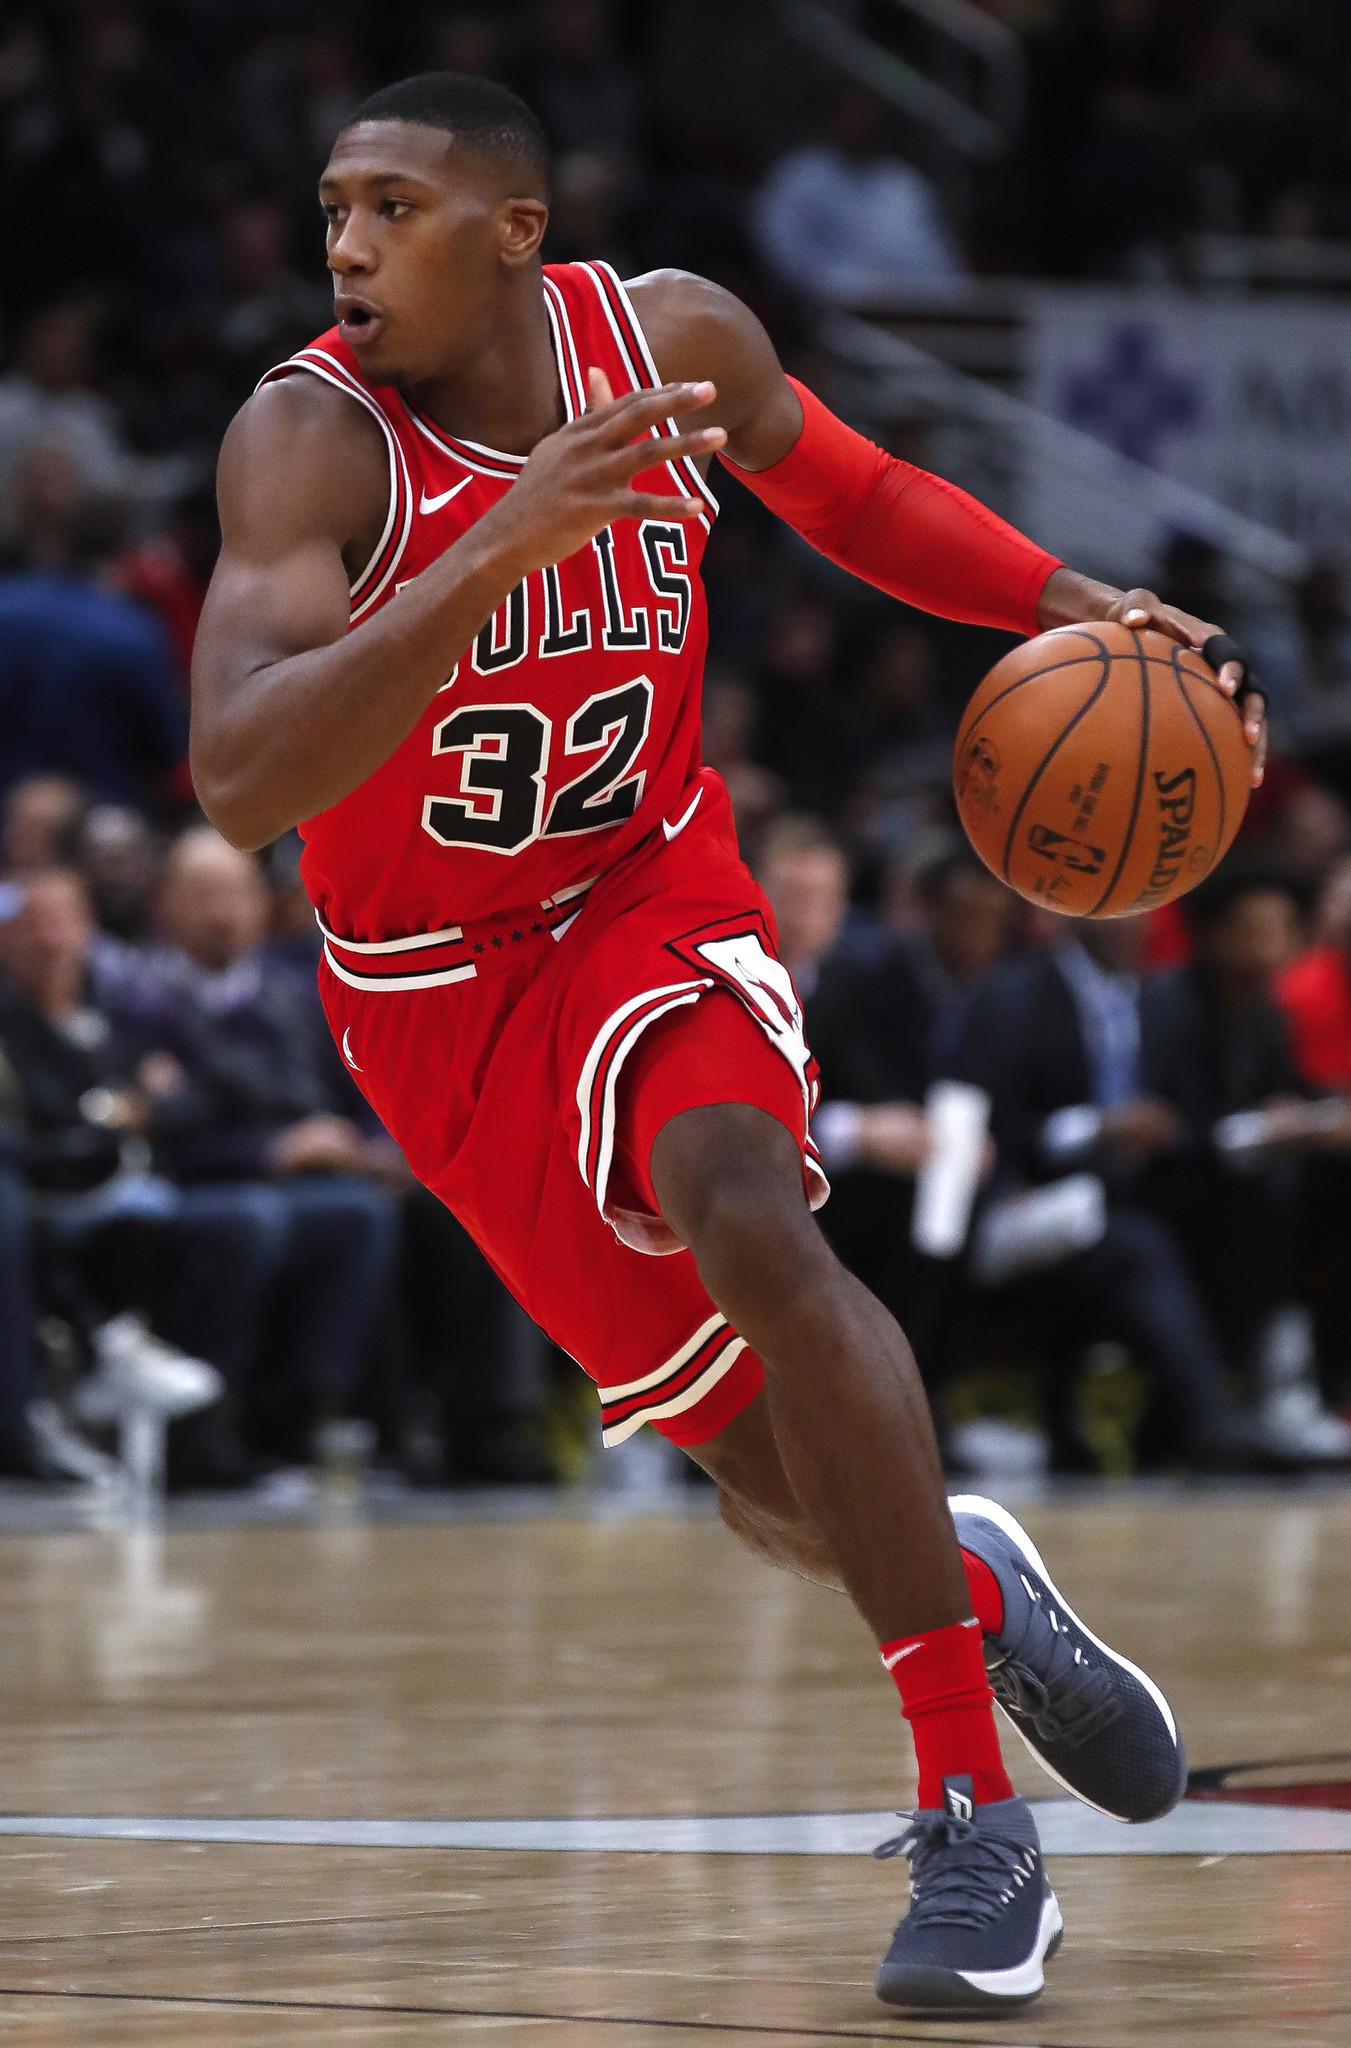 Kris Dunn's prolonged battle with Jerian Grant ends with a starting spot - Chicago Tribune1351 x 2048